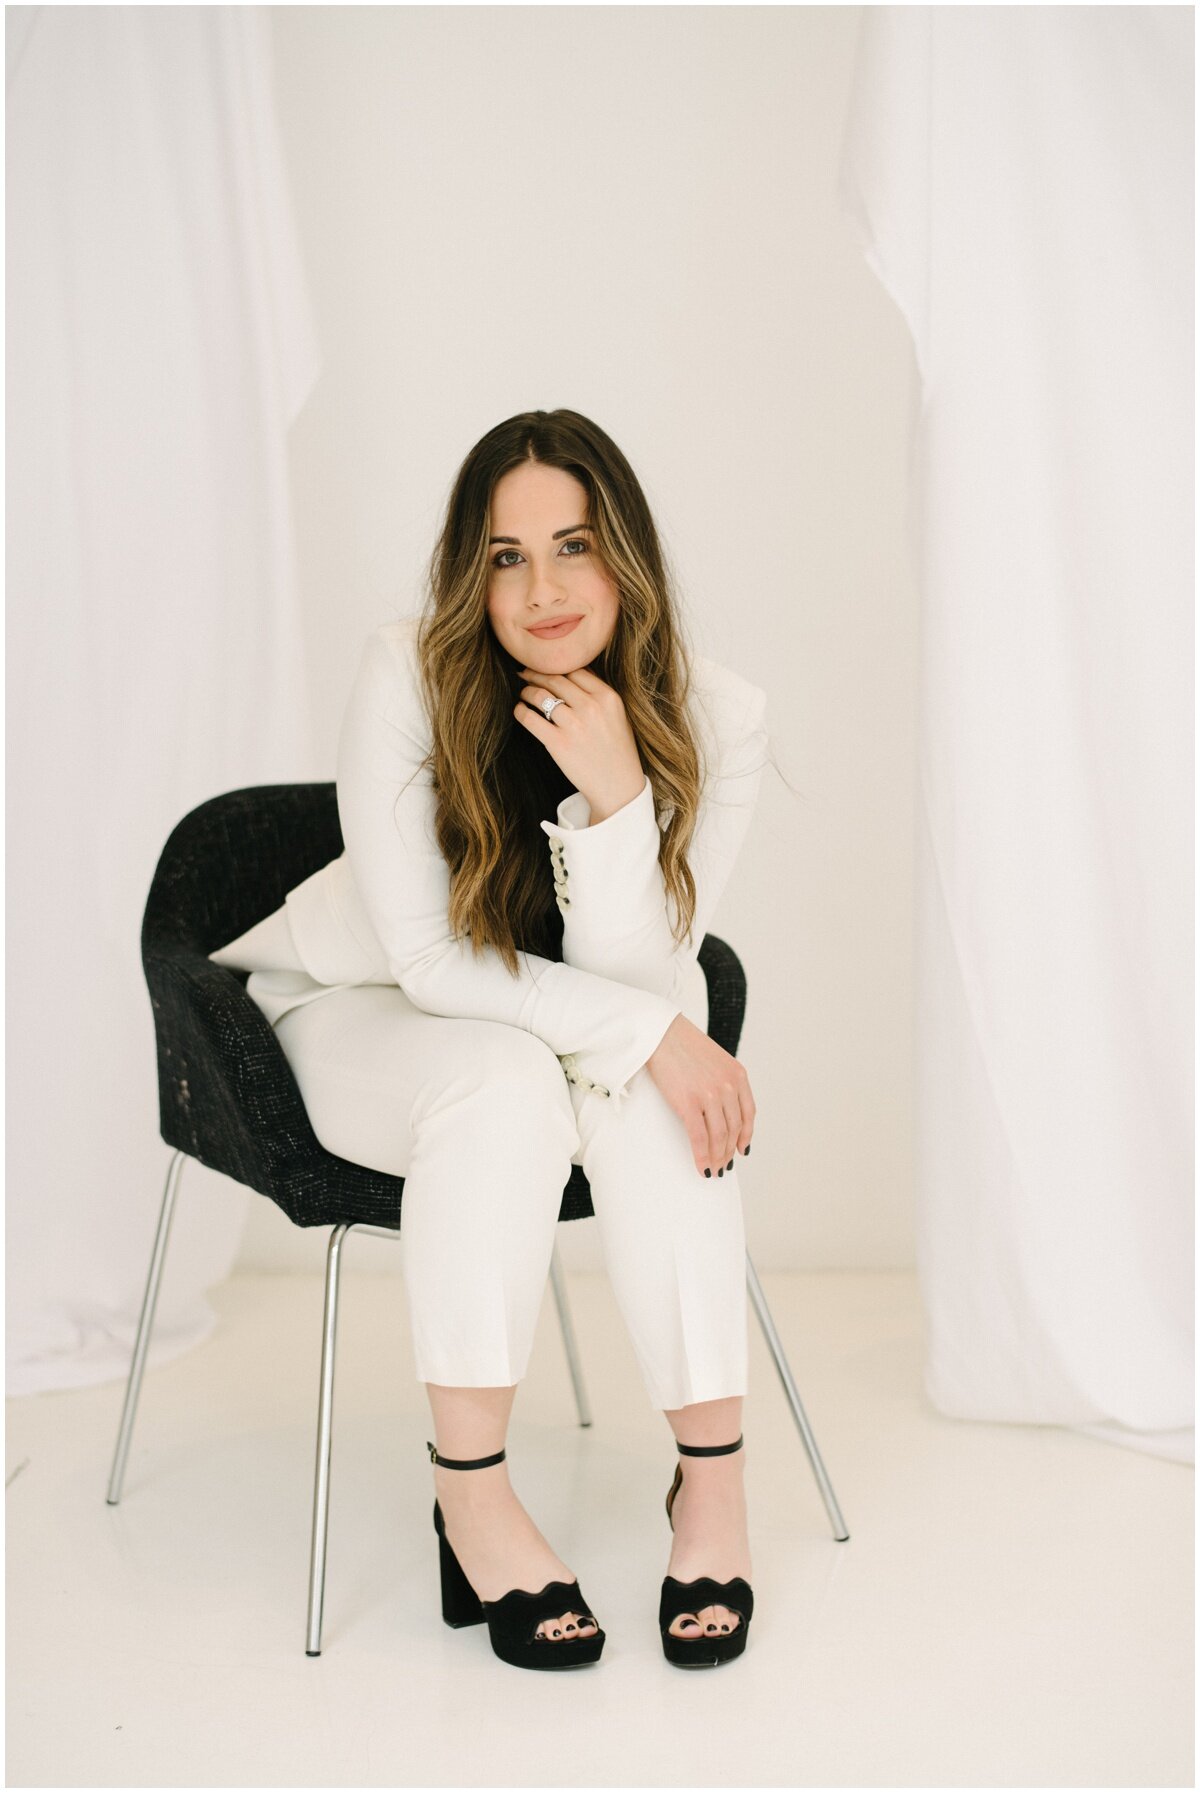  Woman in whit suit with hand on chin, sitting in chair for brand portrait  